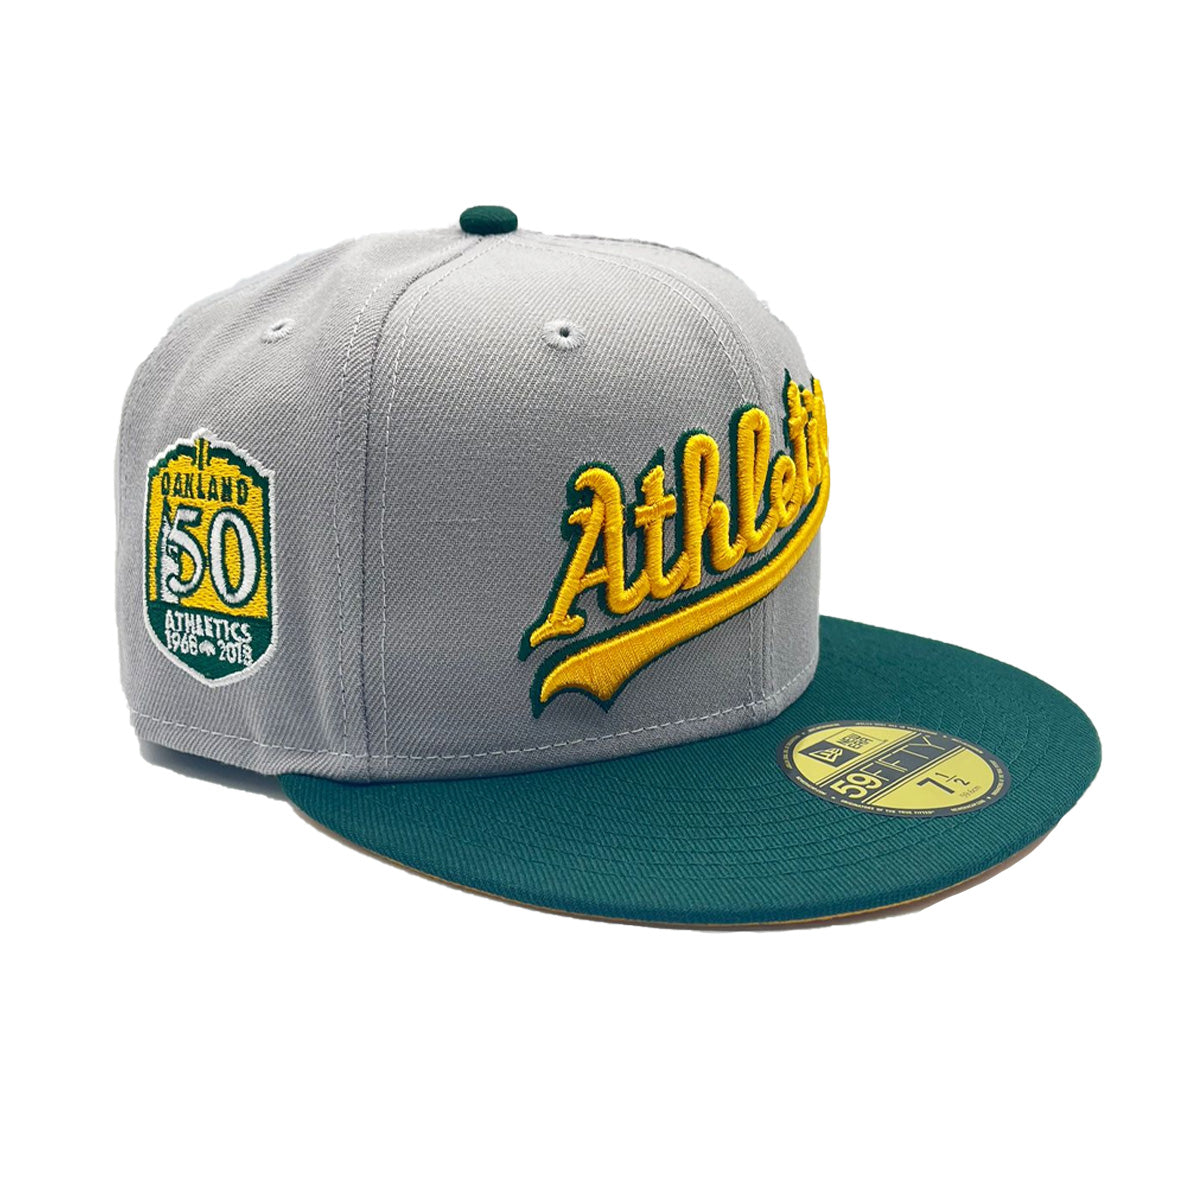 Oakland Athletics New Era 5950 Basic Fitted Hat - Brown/White